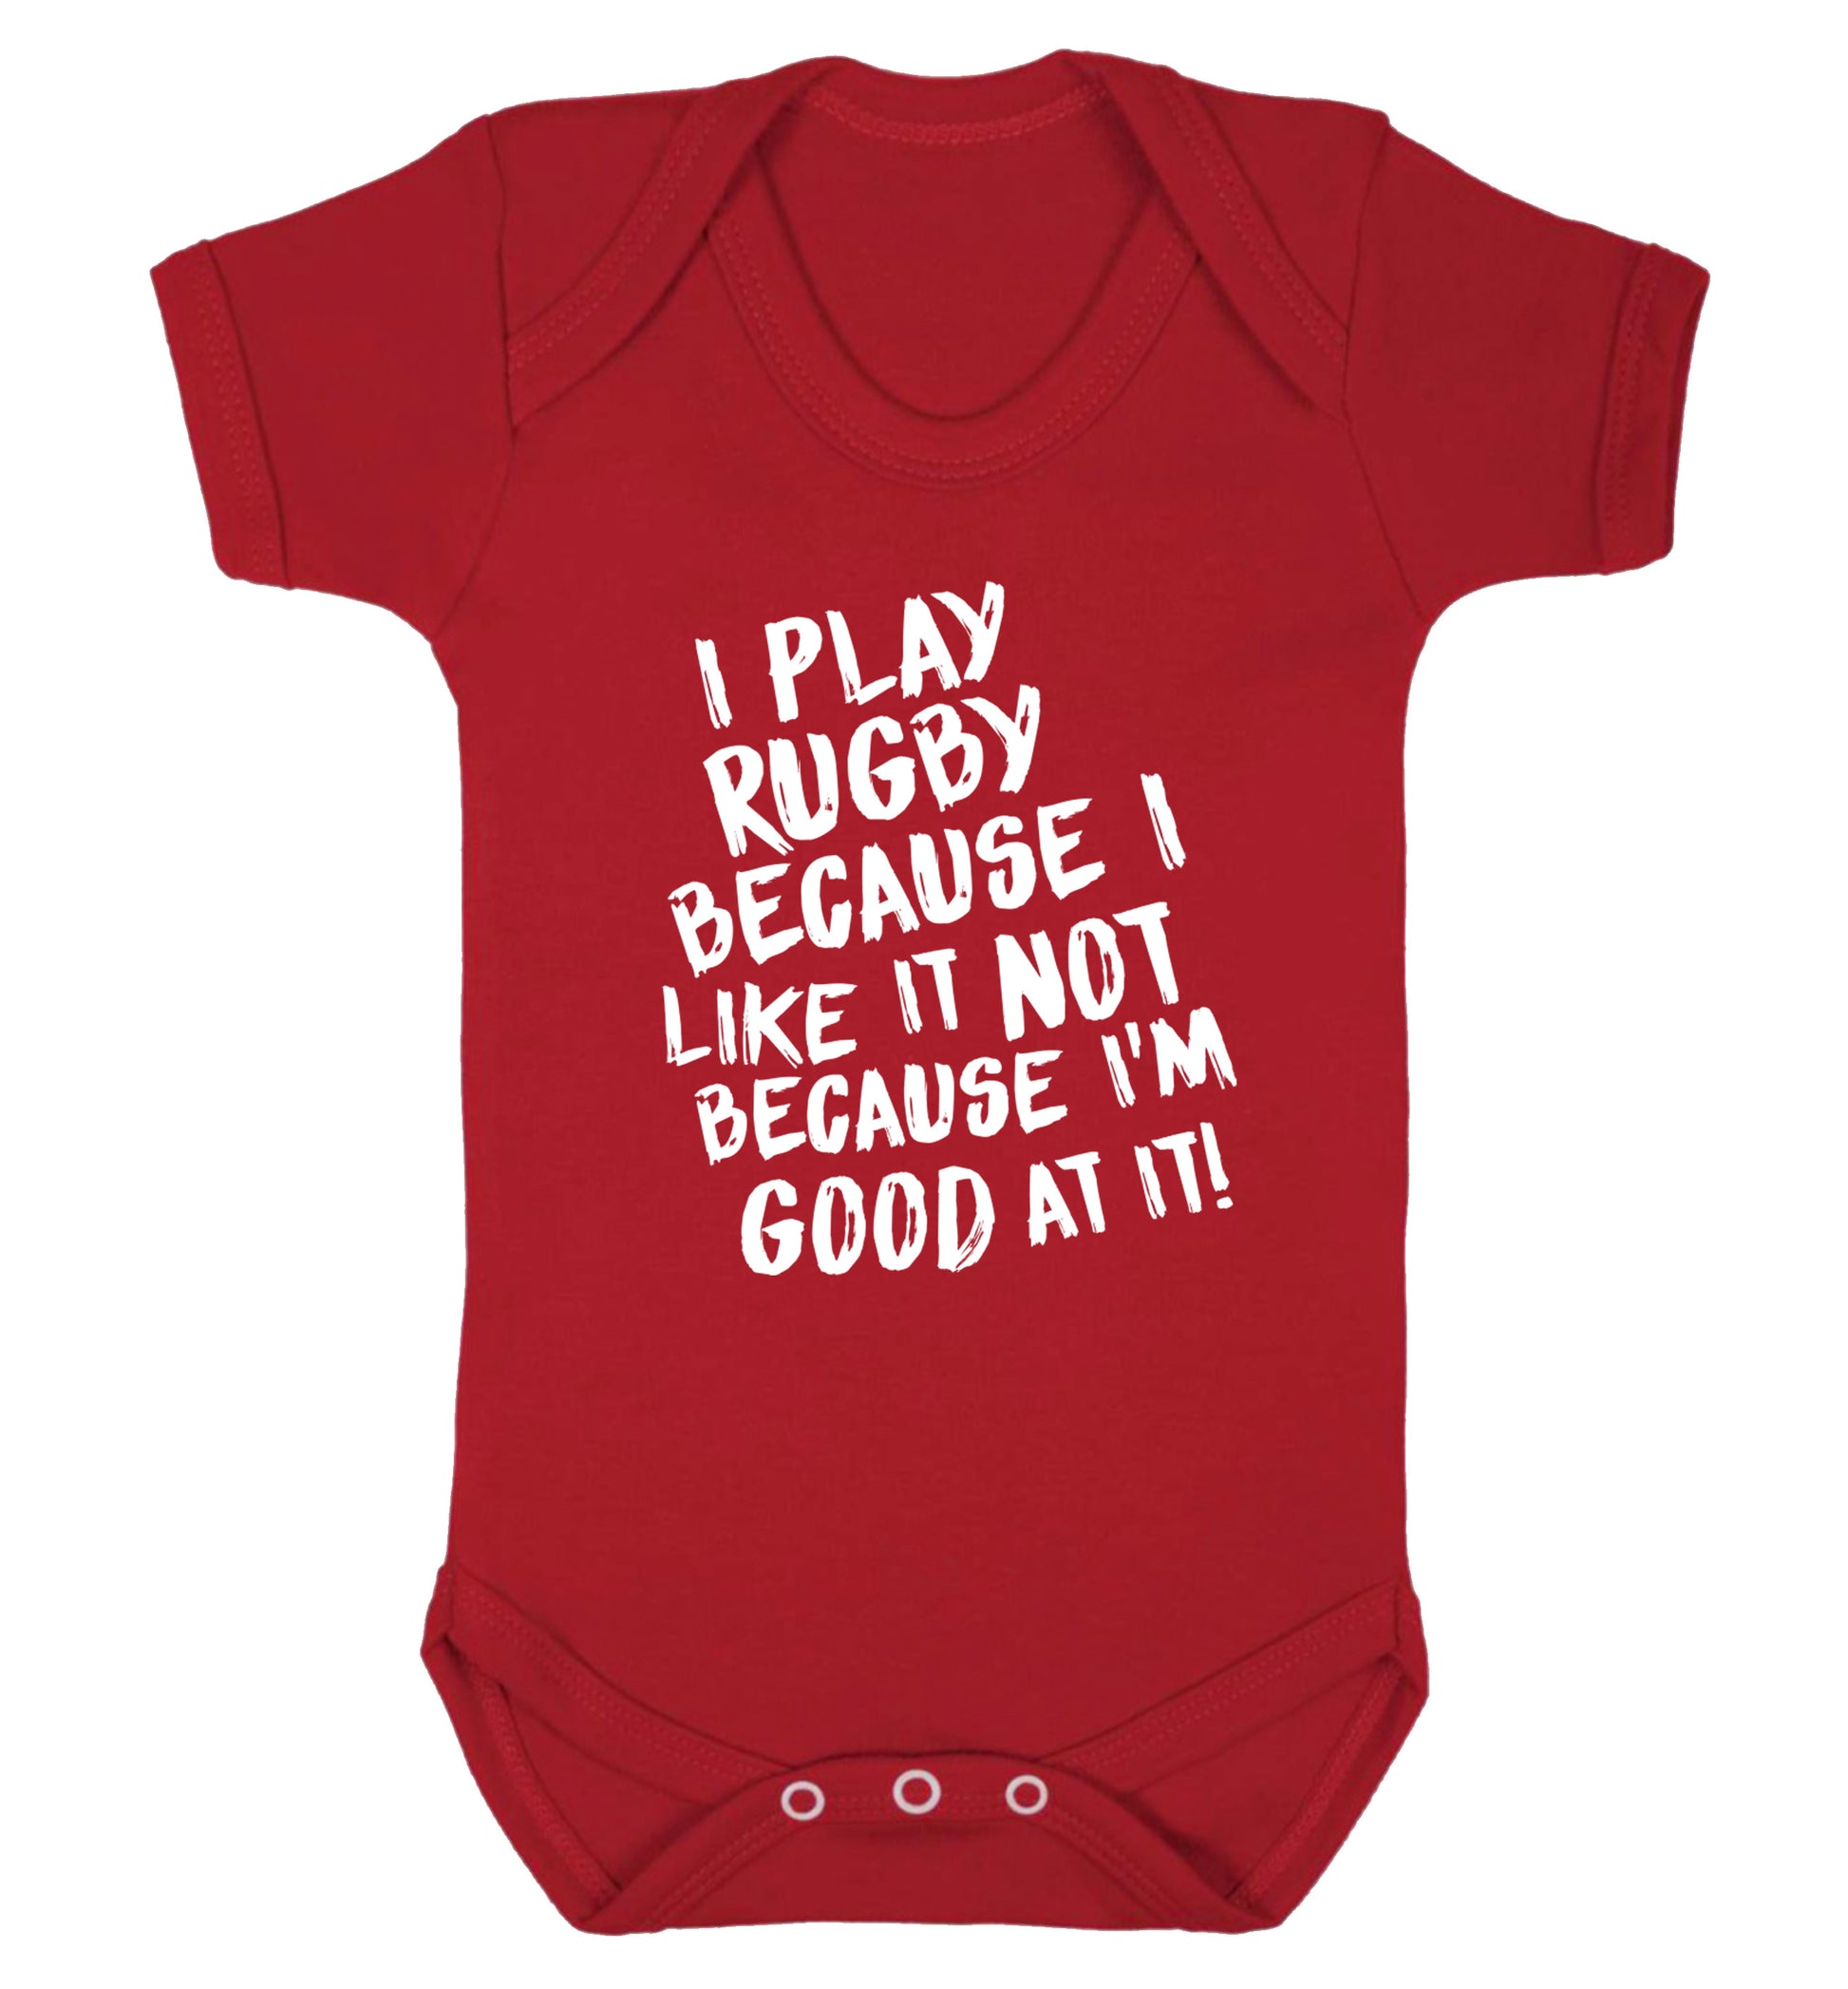 I play rugby because I like it not because I'm good at it Baby Vest red 18-24 months